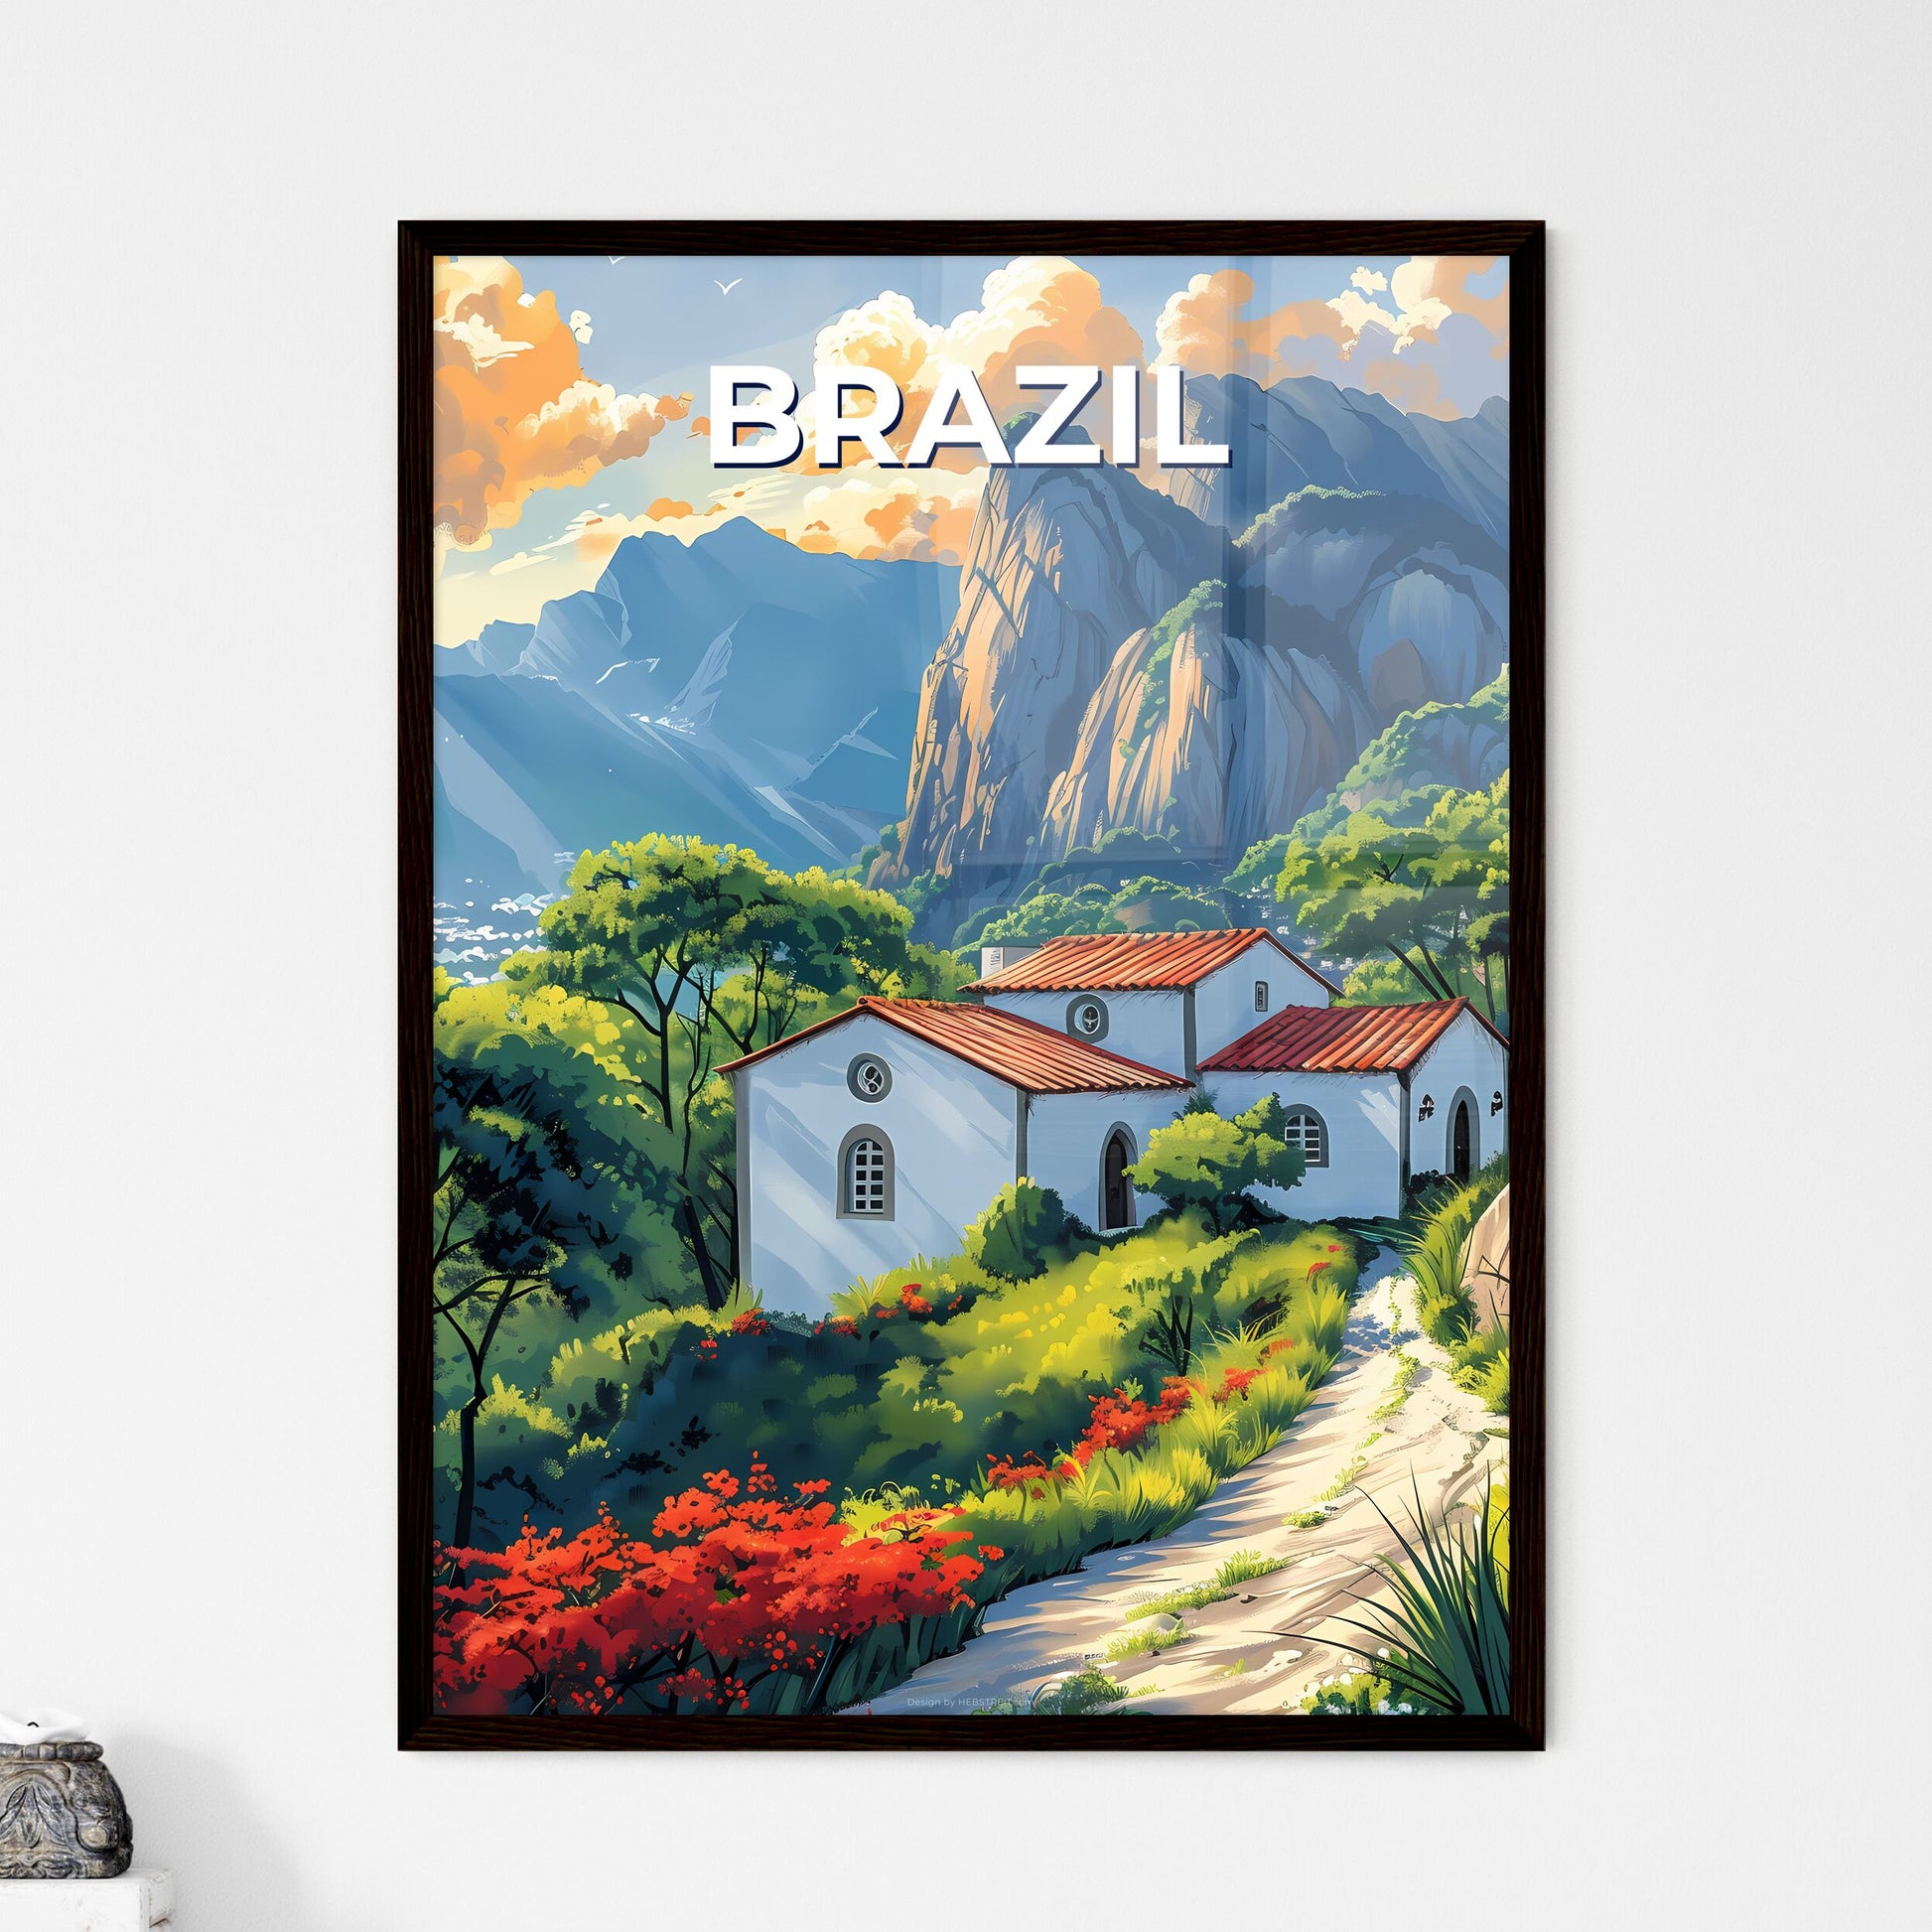 Vibrant Art Painting of a House in a Brazilian Forest with Mountain Landscape